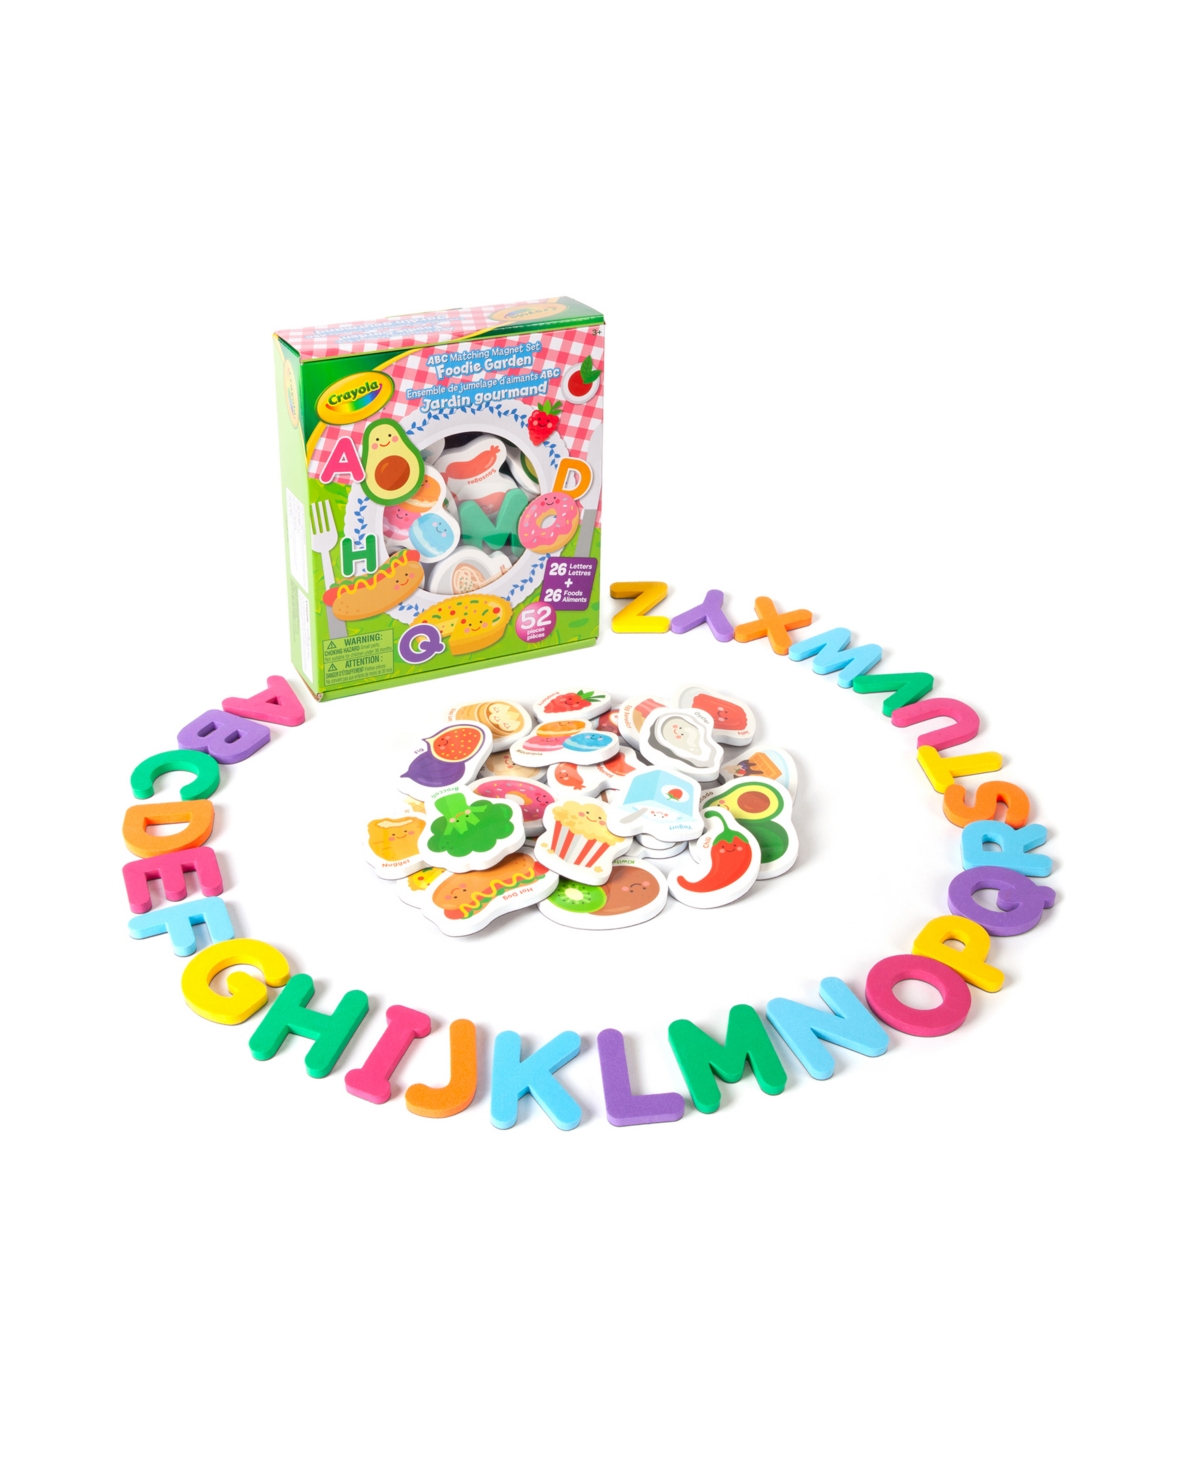 Grow 'n Up Crayola Abc Match Magnetic Set In Multi